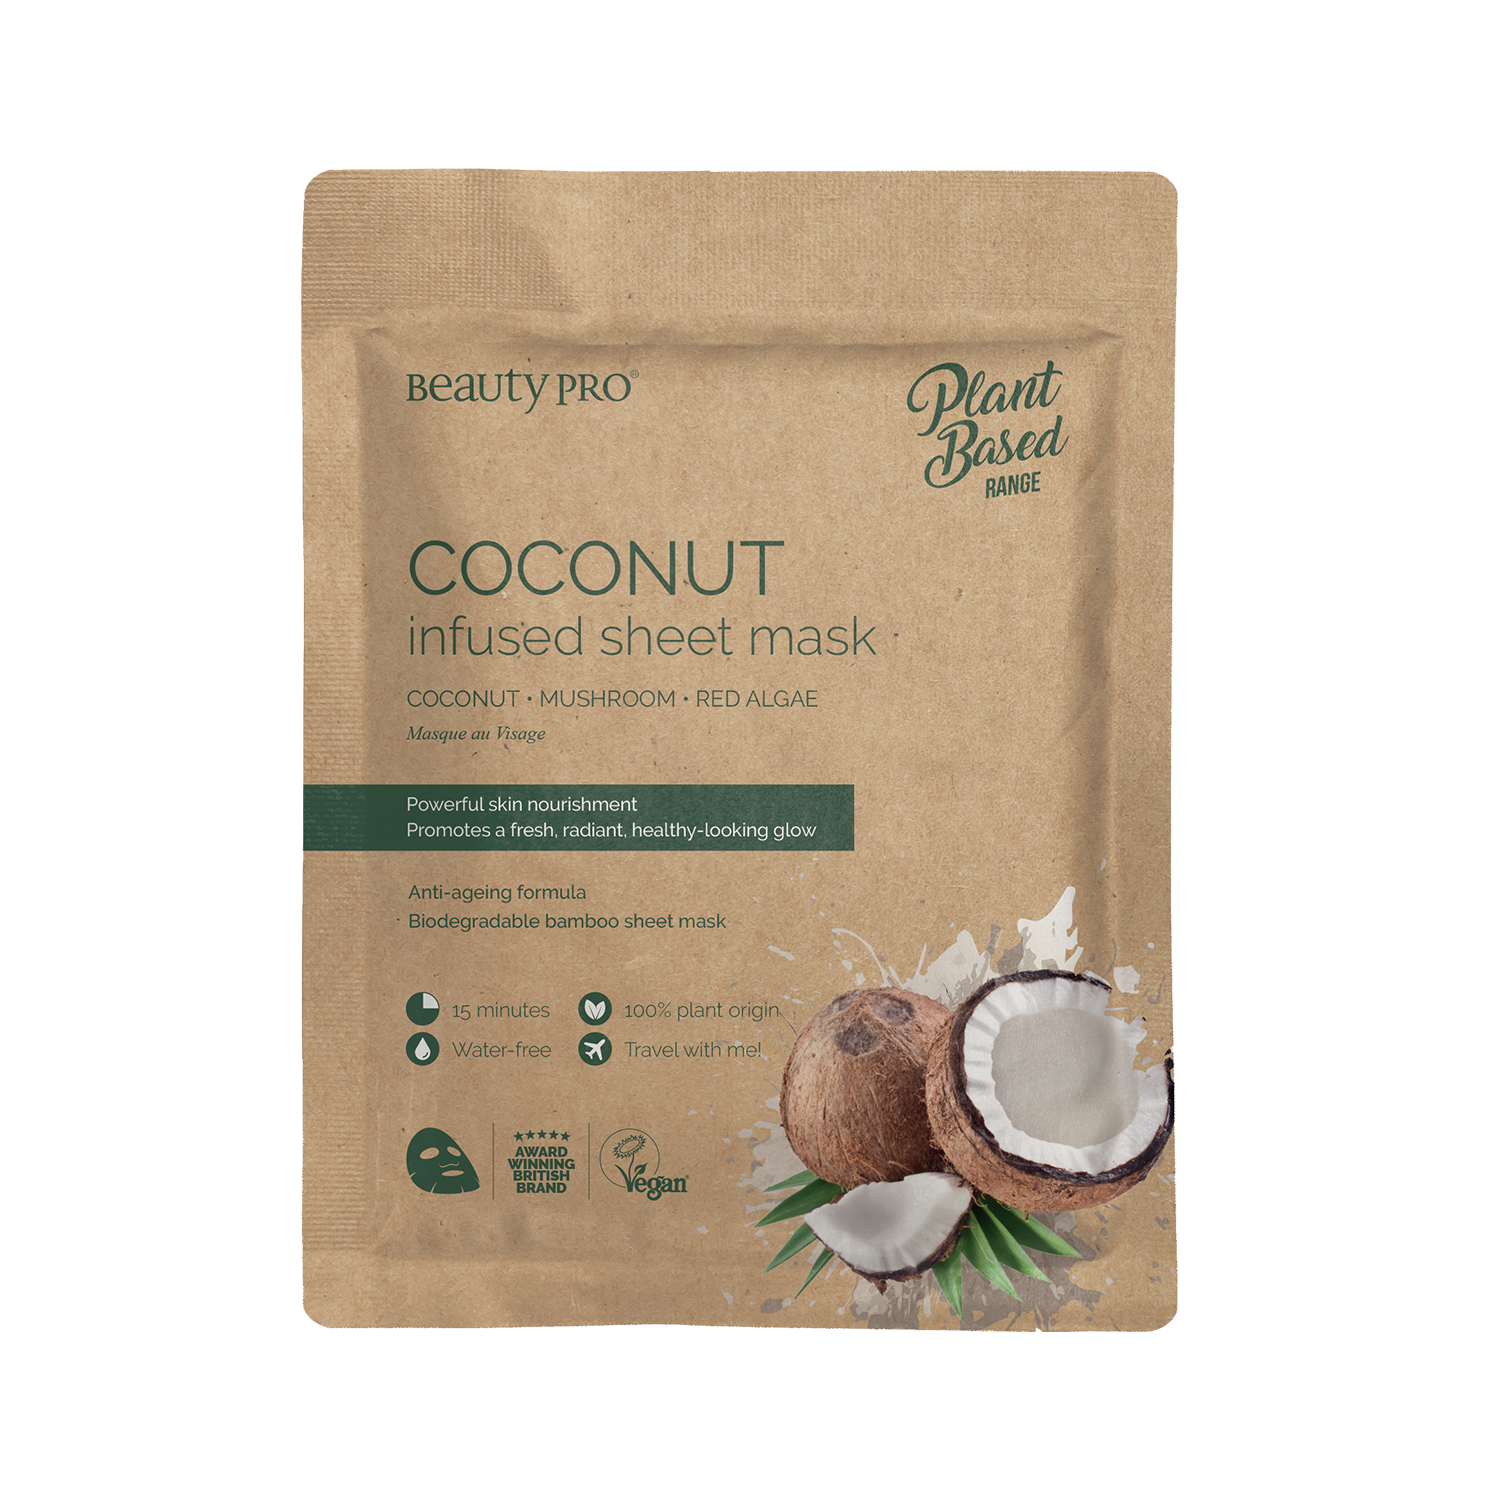 Beautypro Coconut Infused Sheet Mask